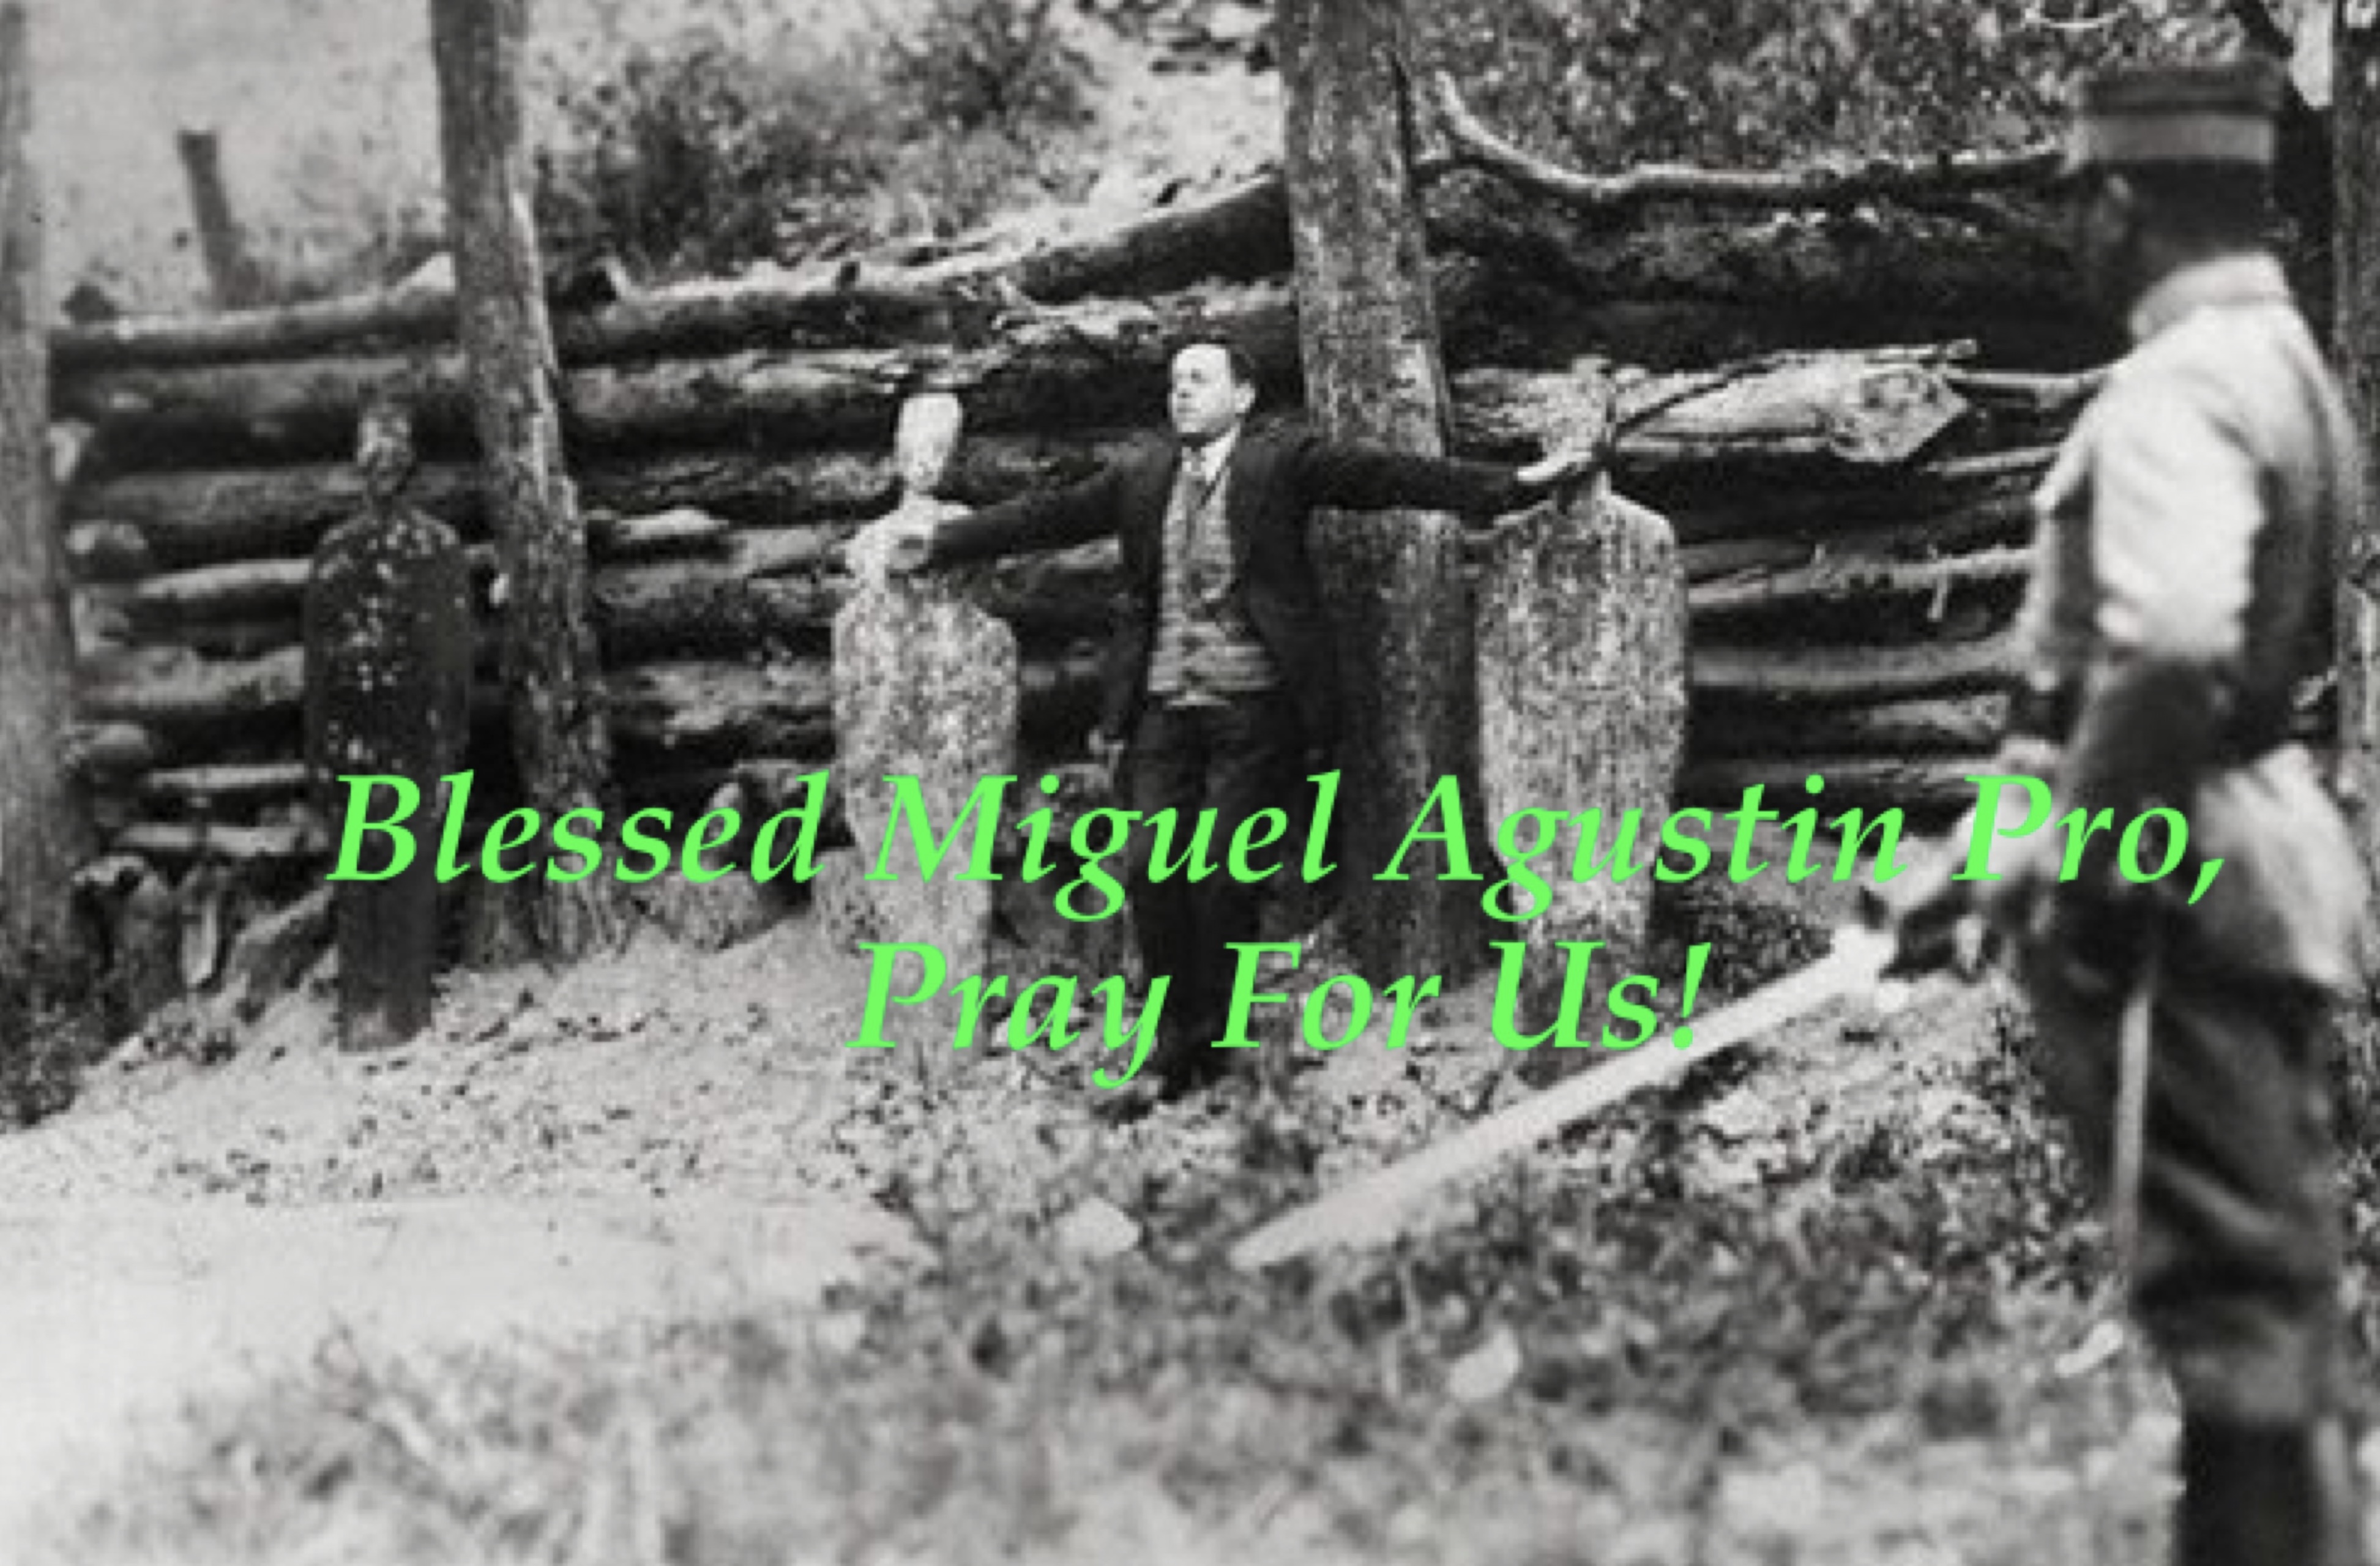 23rd November - Blessed Miguel Agustin Pro